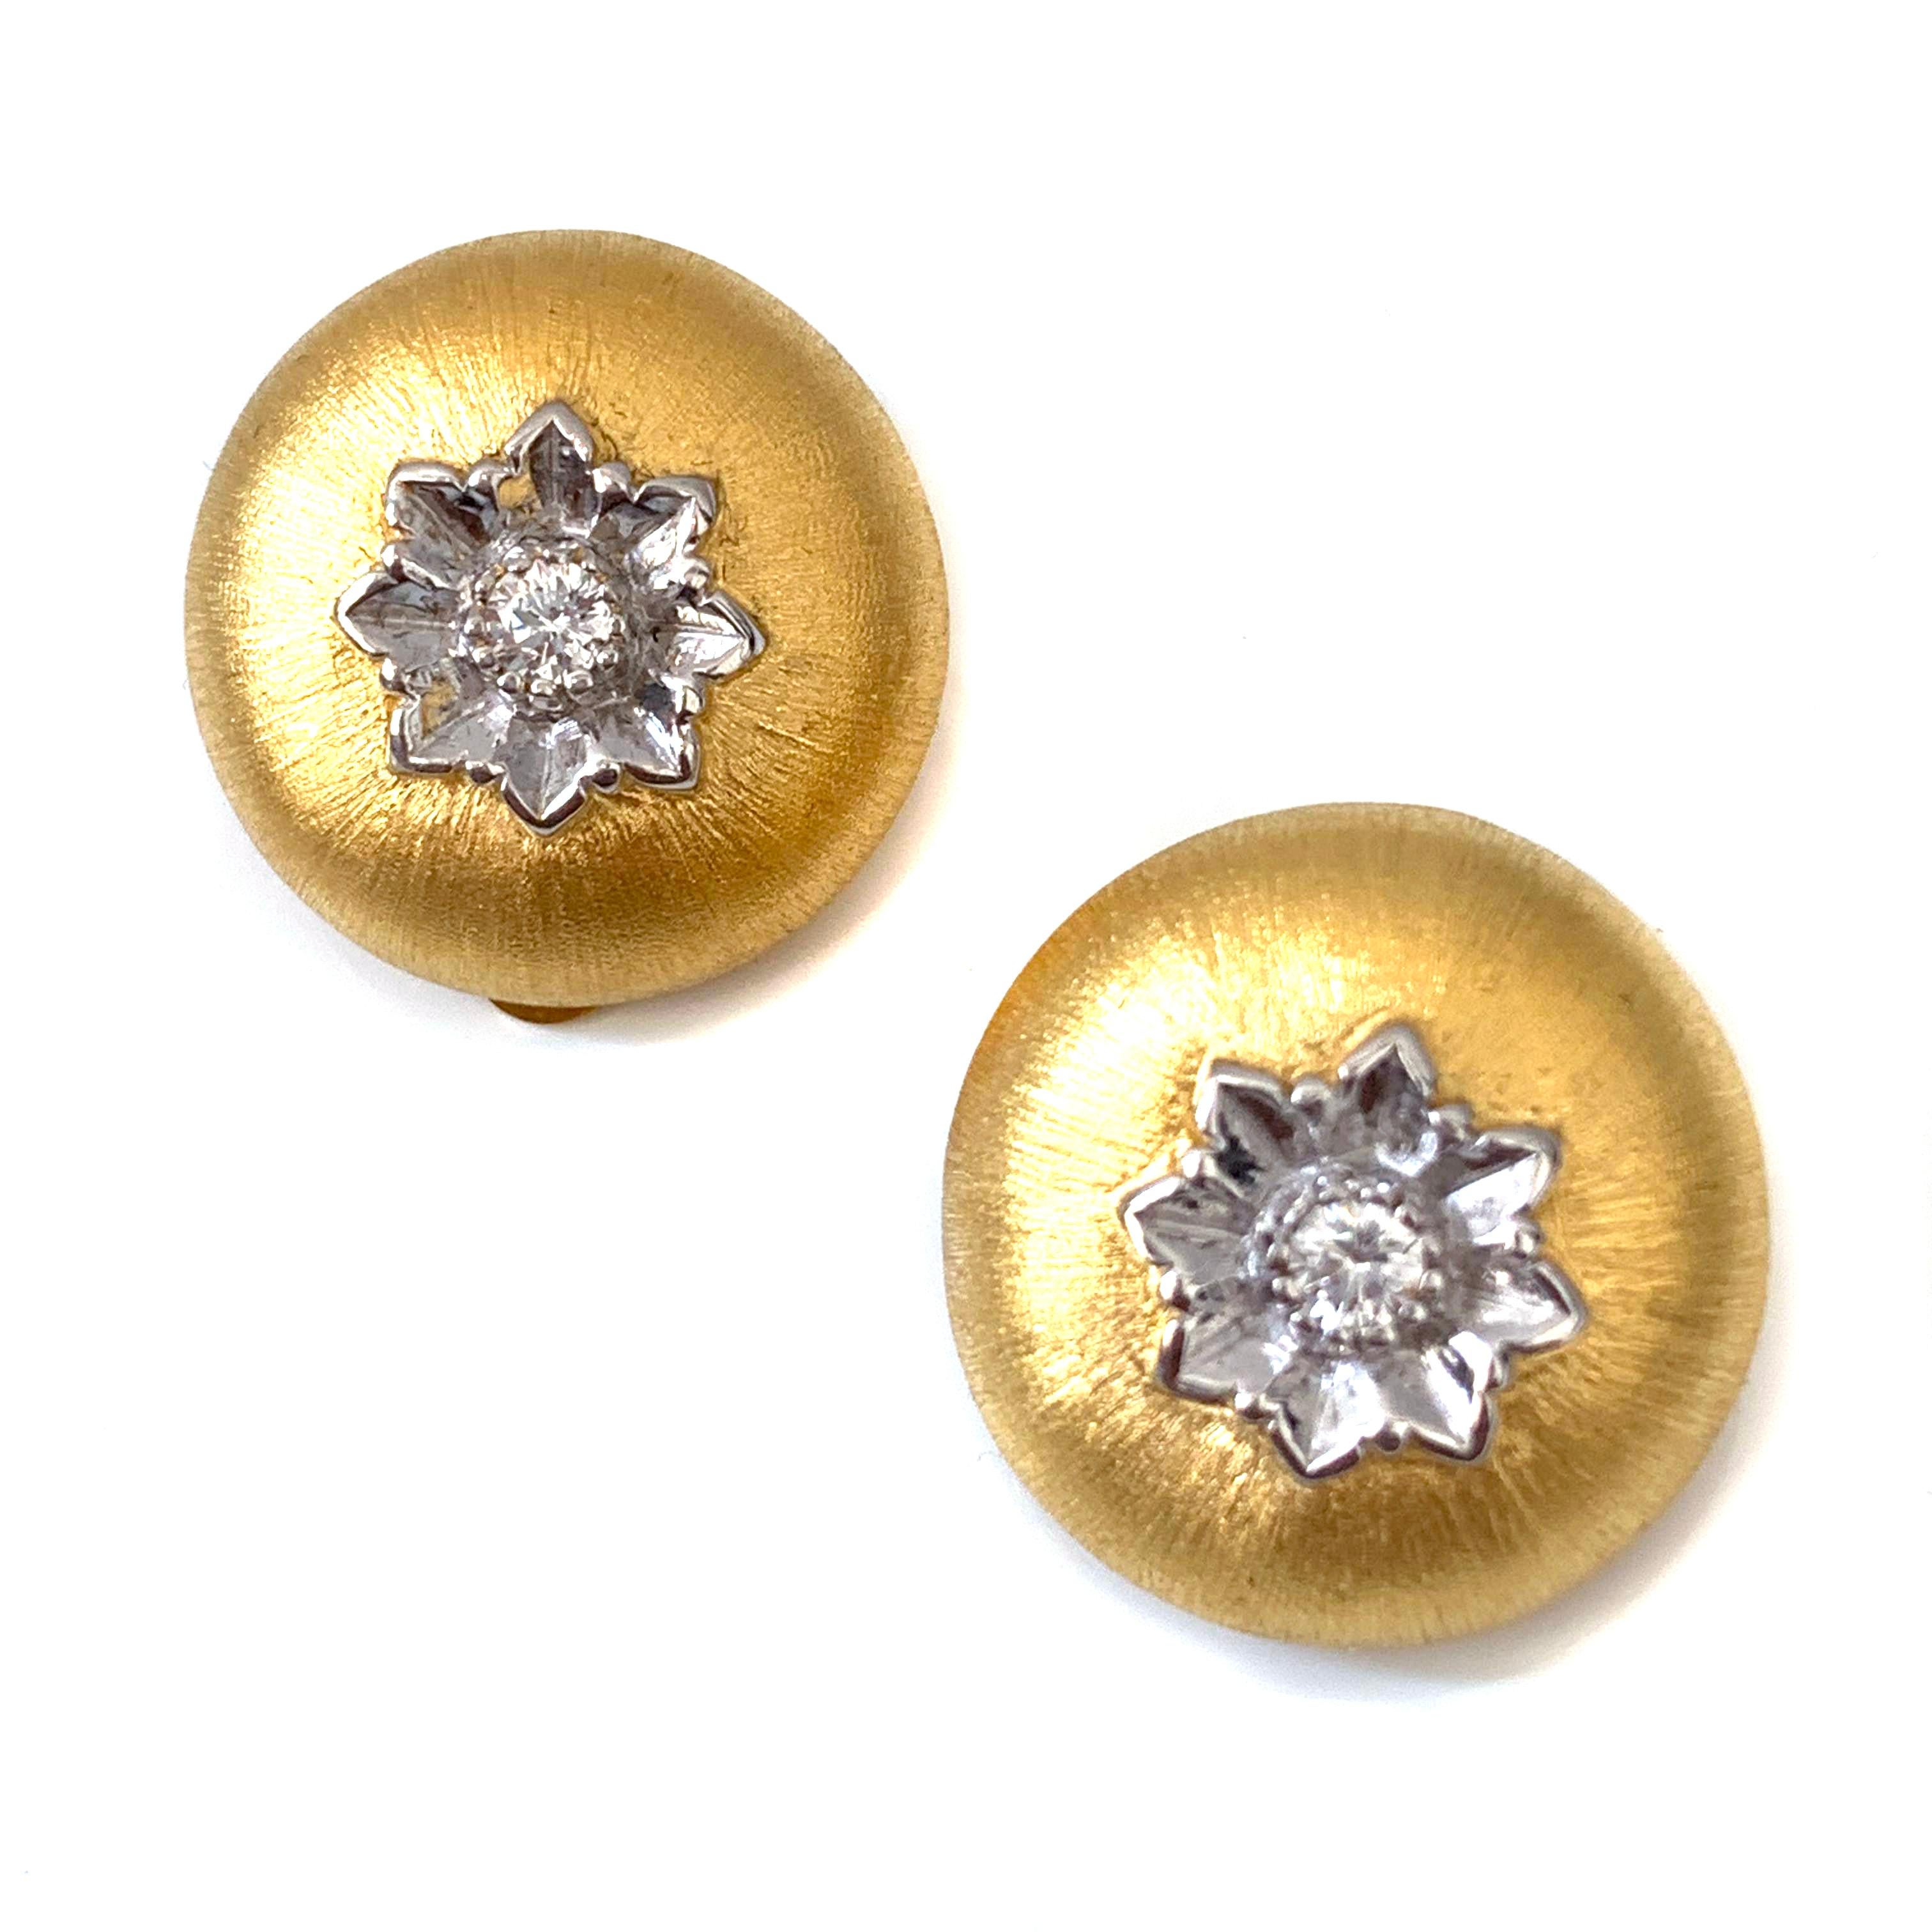 Stunning Hand-engraved Flower Round Clip-on Earrings handset with Faux Diamond Cubic Zirconia.  The earrings feature hand-engraved flower, along with handcrafted Italian Rigato etching technique. 18k gold vermeil with platinum rhodium two tone